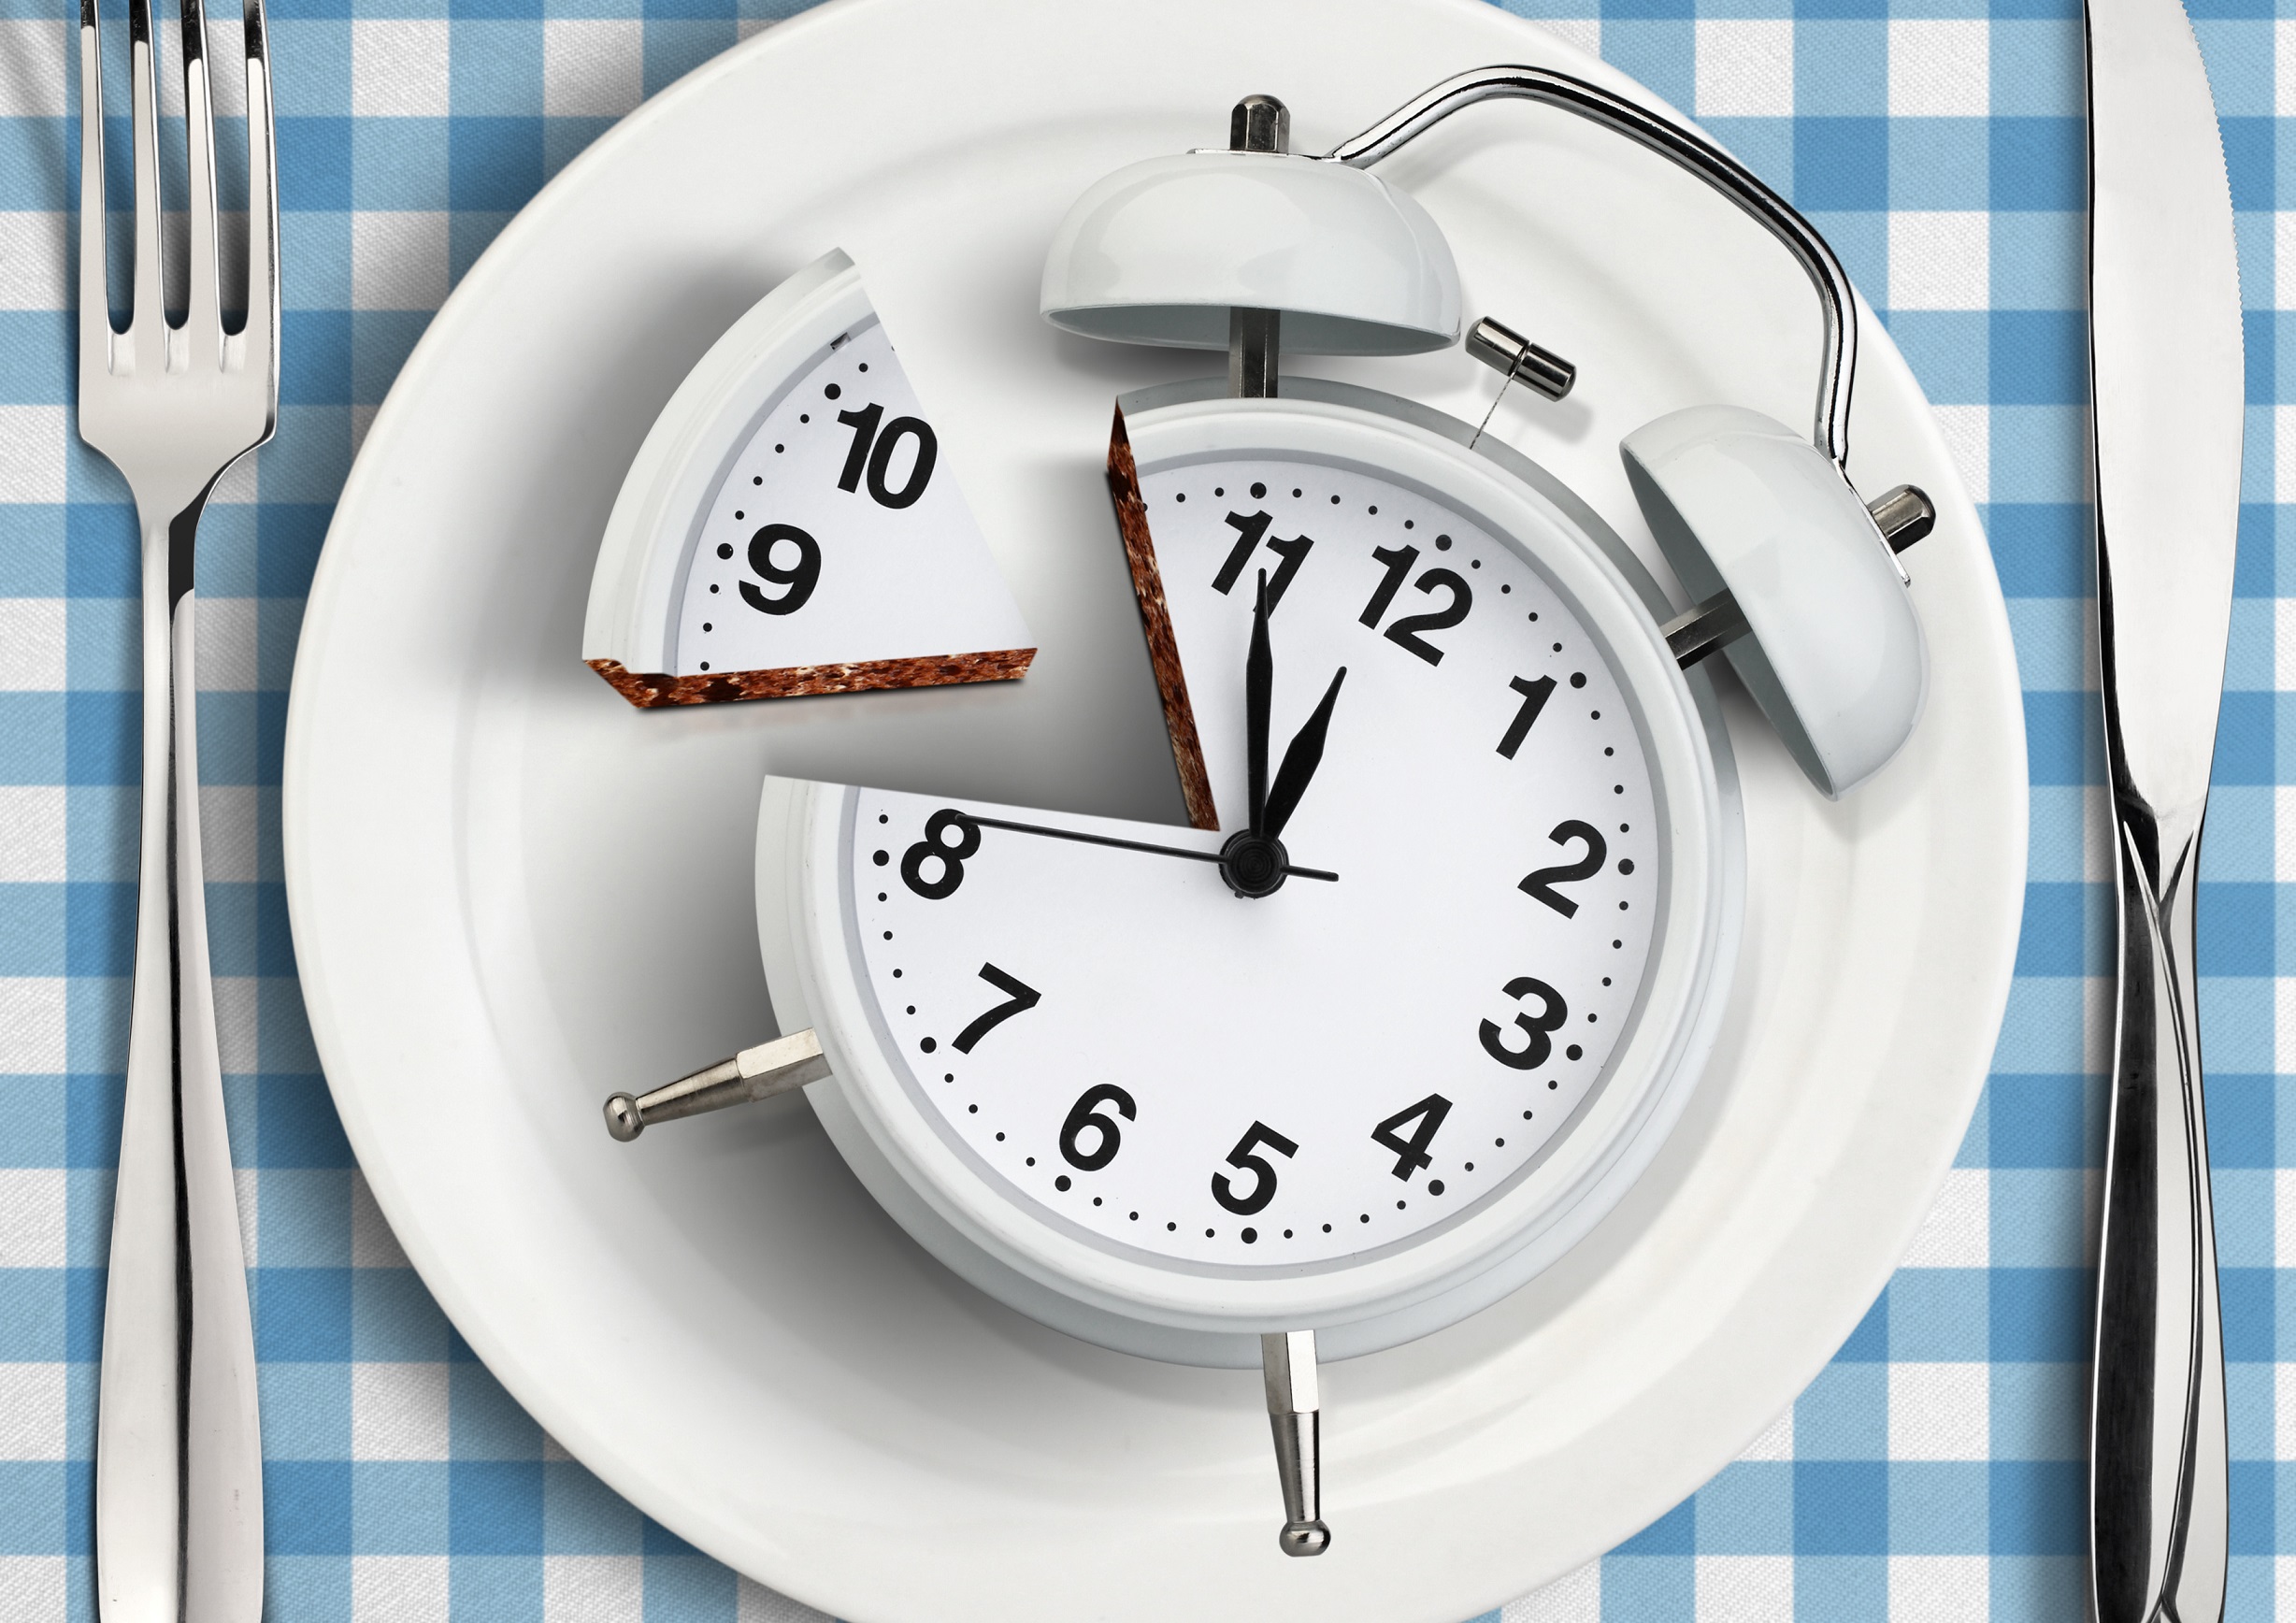 Intermittent Fasting for Metabolic Diseases - A Healing Practice